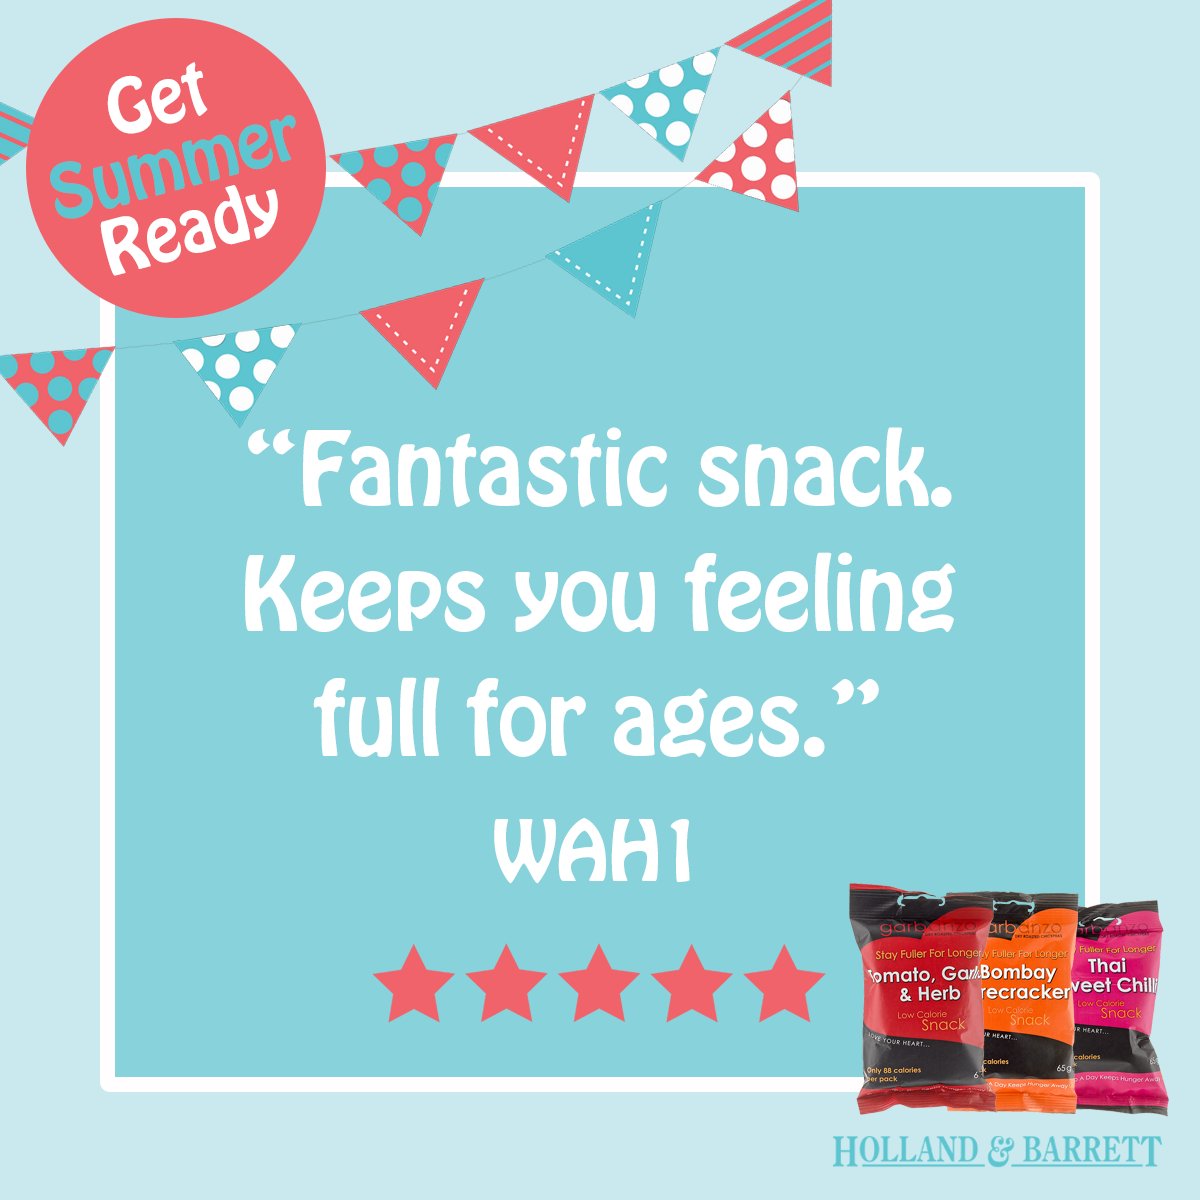 Look what our lovely customer had to say about Garbanzo Dry Roasted Chickpeas! https://t.co/ROIjWXi5bm